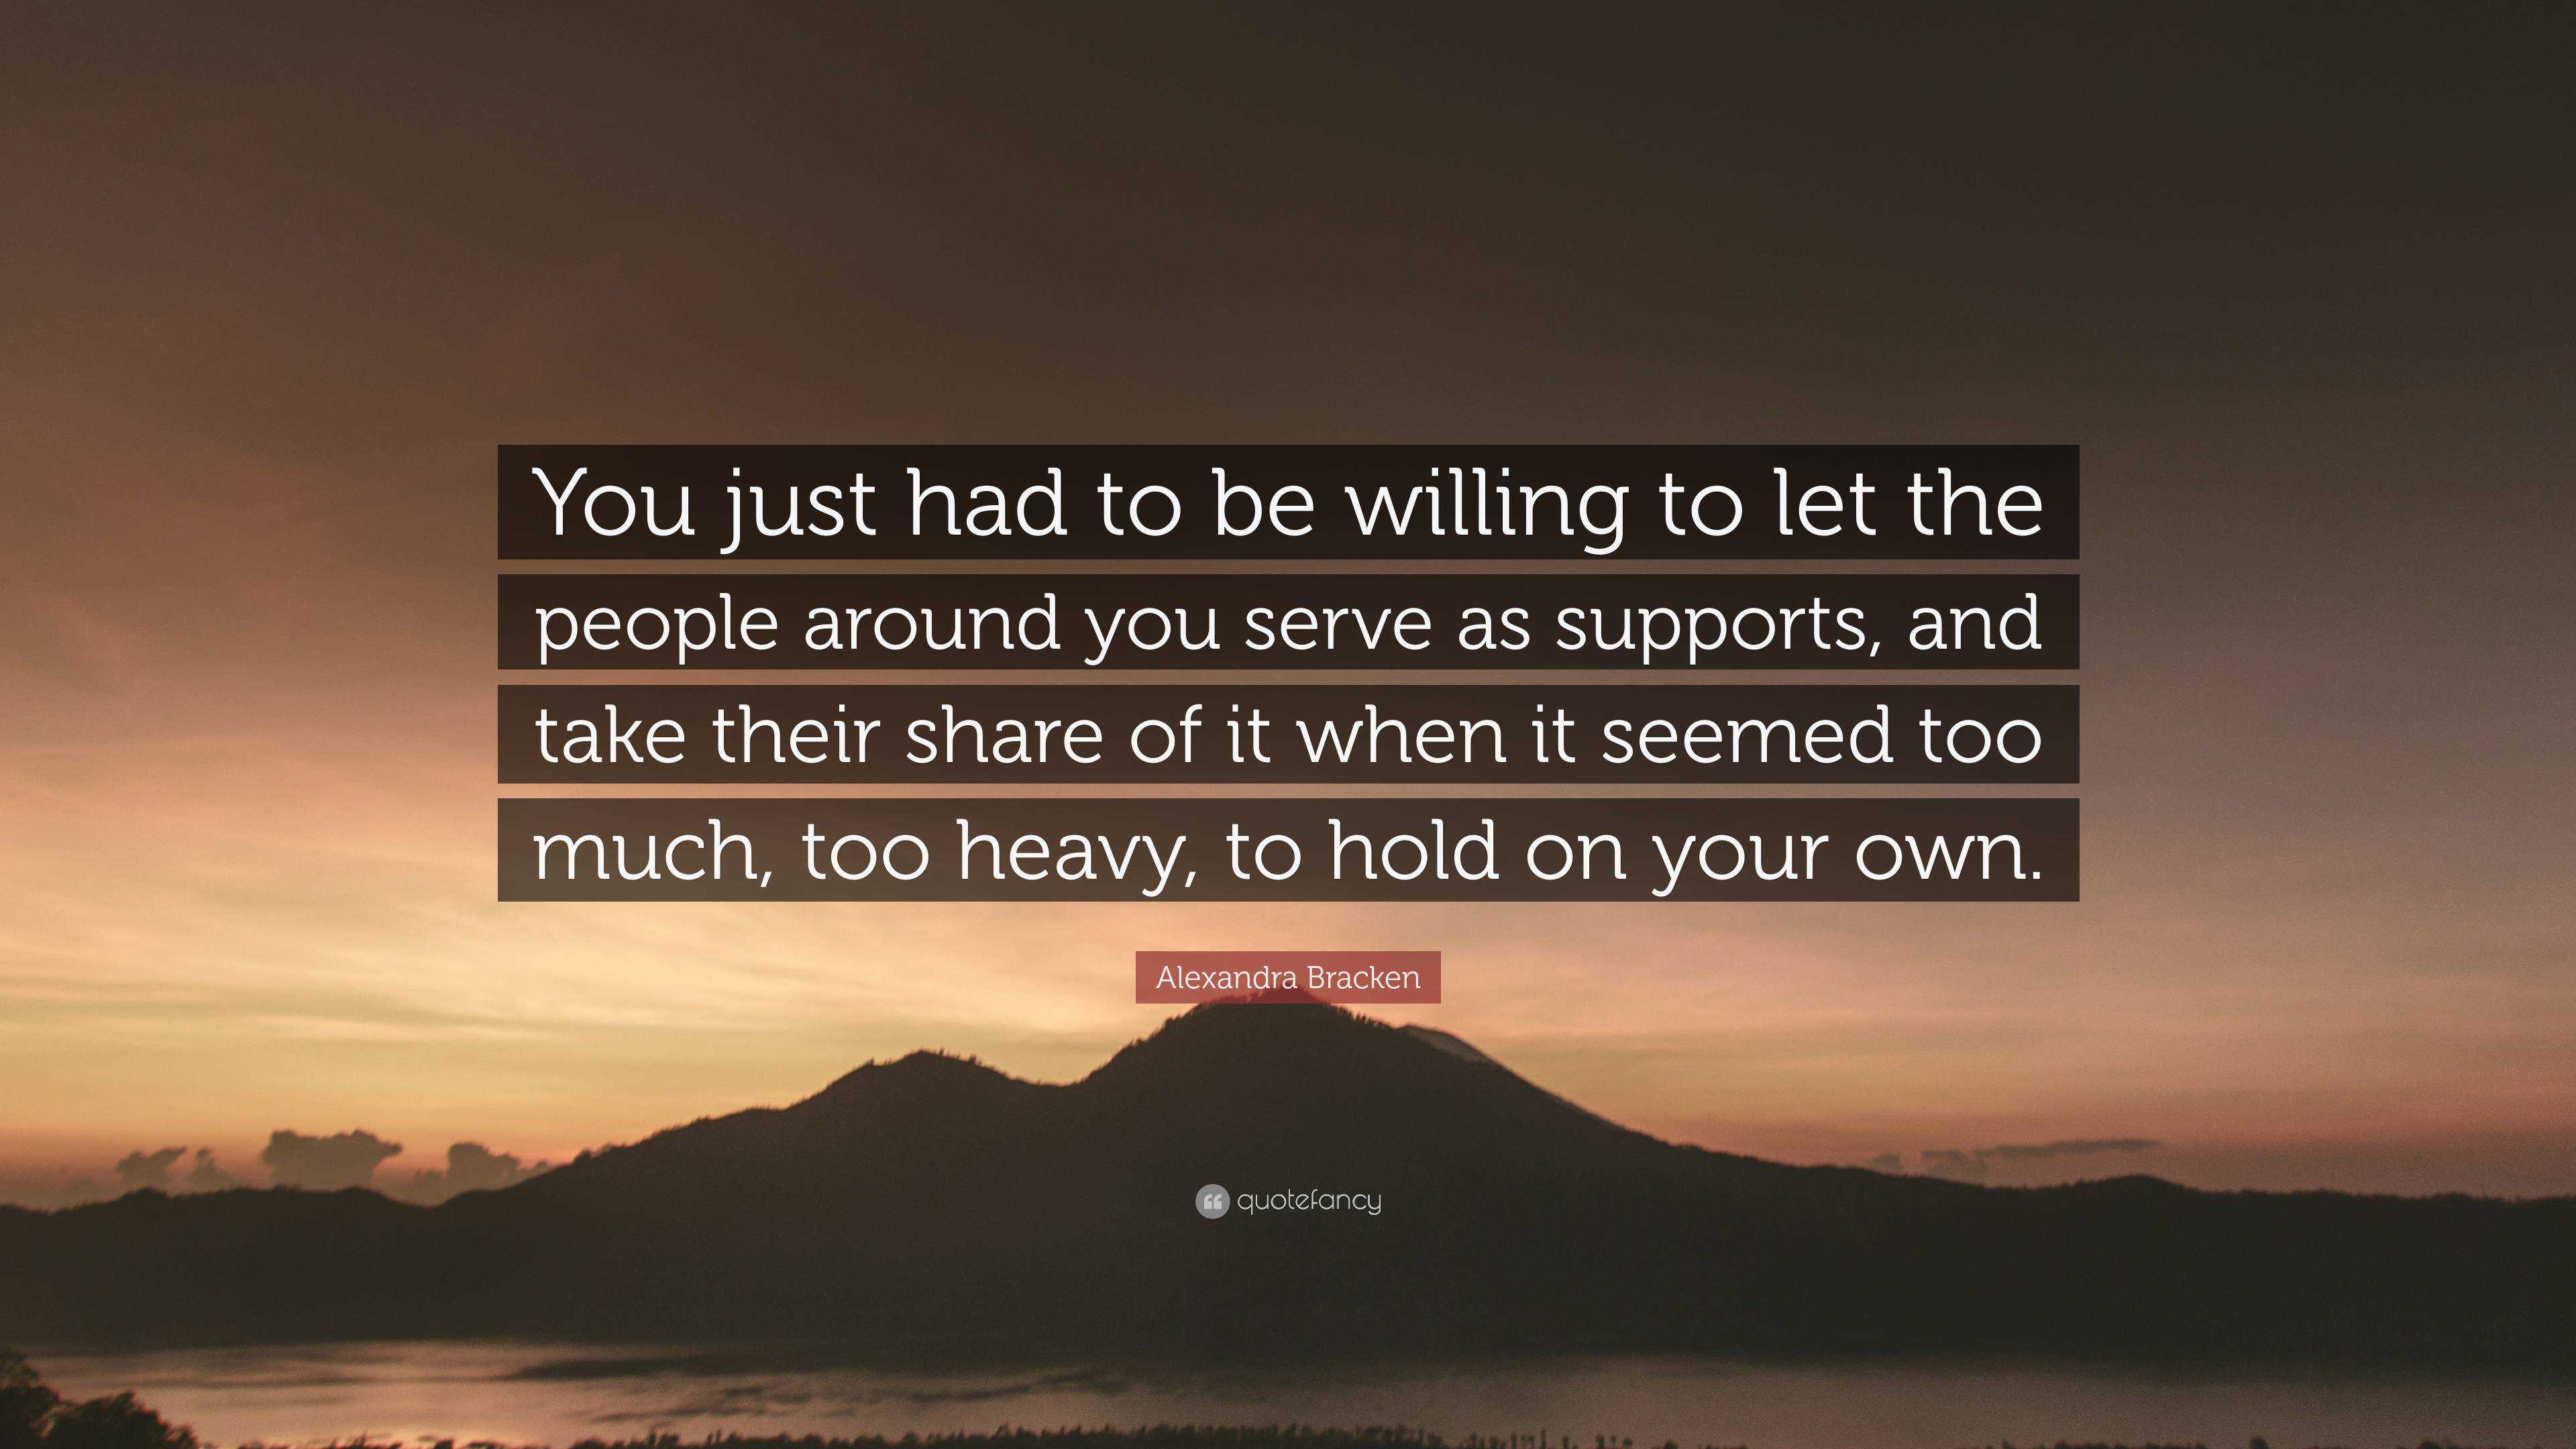 Alexandra Bracken Quote: “You just had to be willing to let the people ...